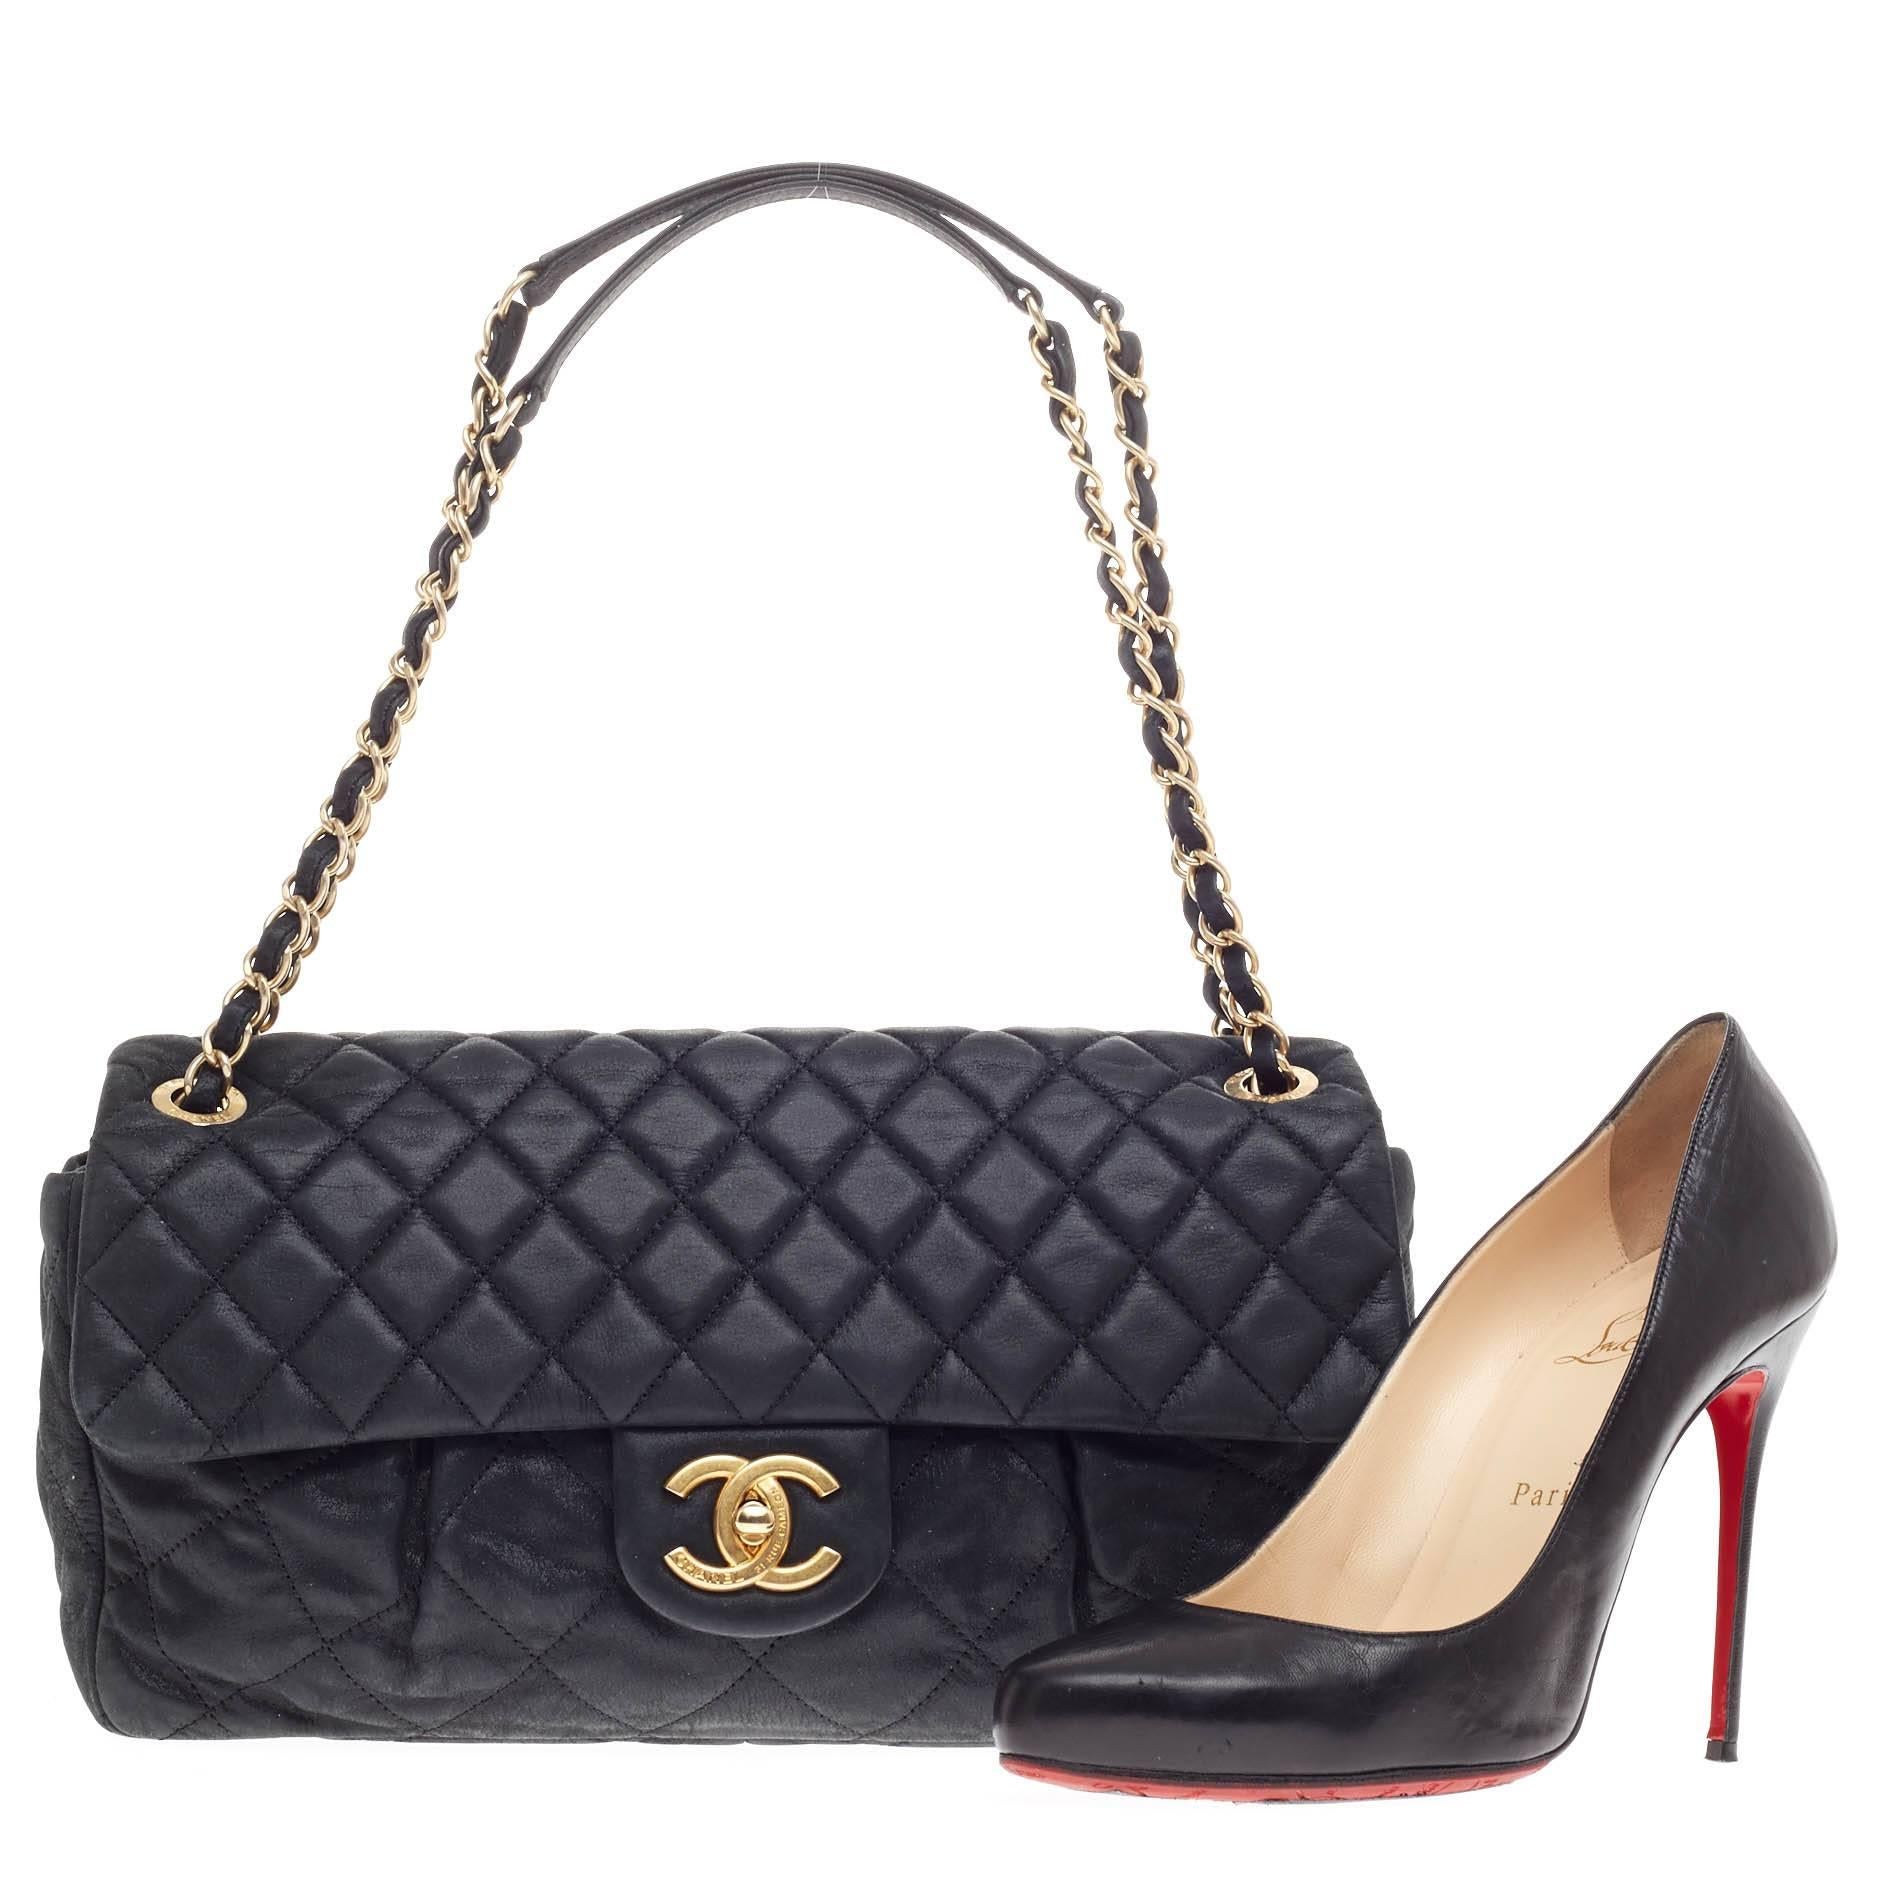 This authentic Chanel Chic Quilt Flap Bag Quilted Iridescent Leather Large presented in the brand's 2011-2012 Collection in luxurious navy iridescent calfskin is a sumptuous accessory that adds a touch of glamour to any look. Designed in Chanel's